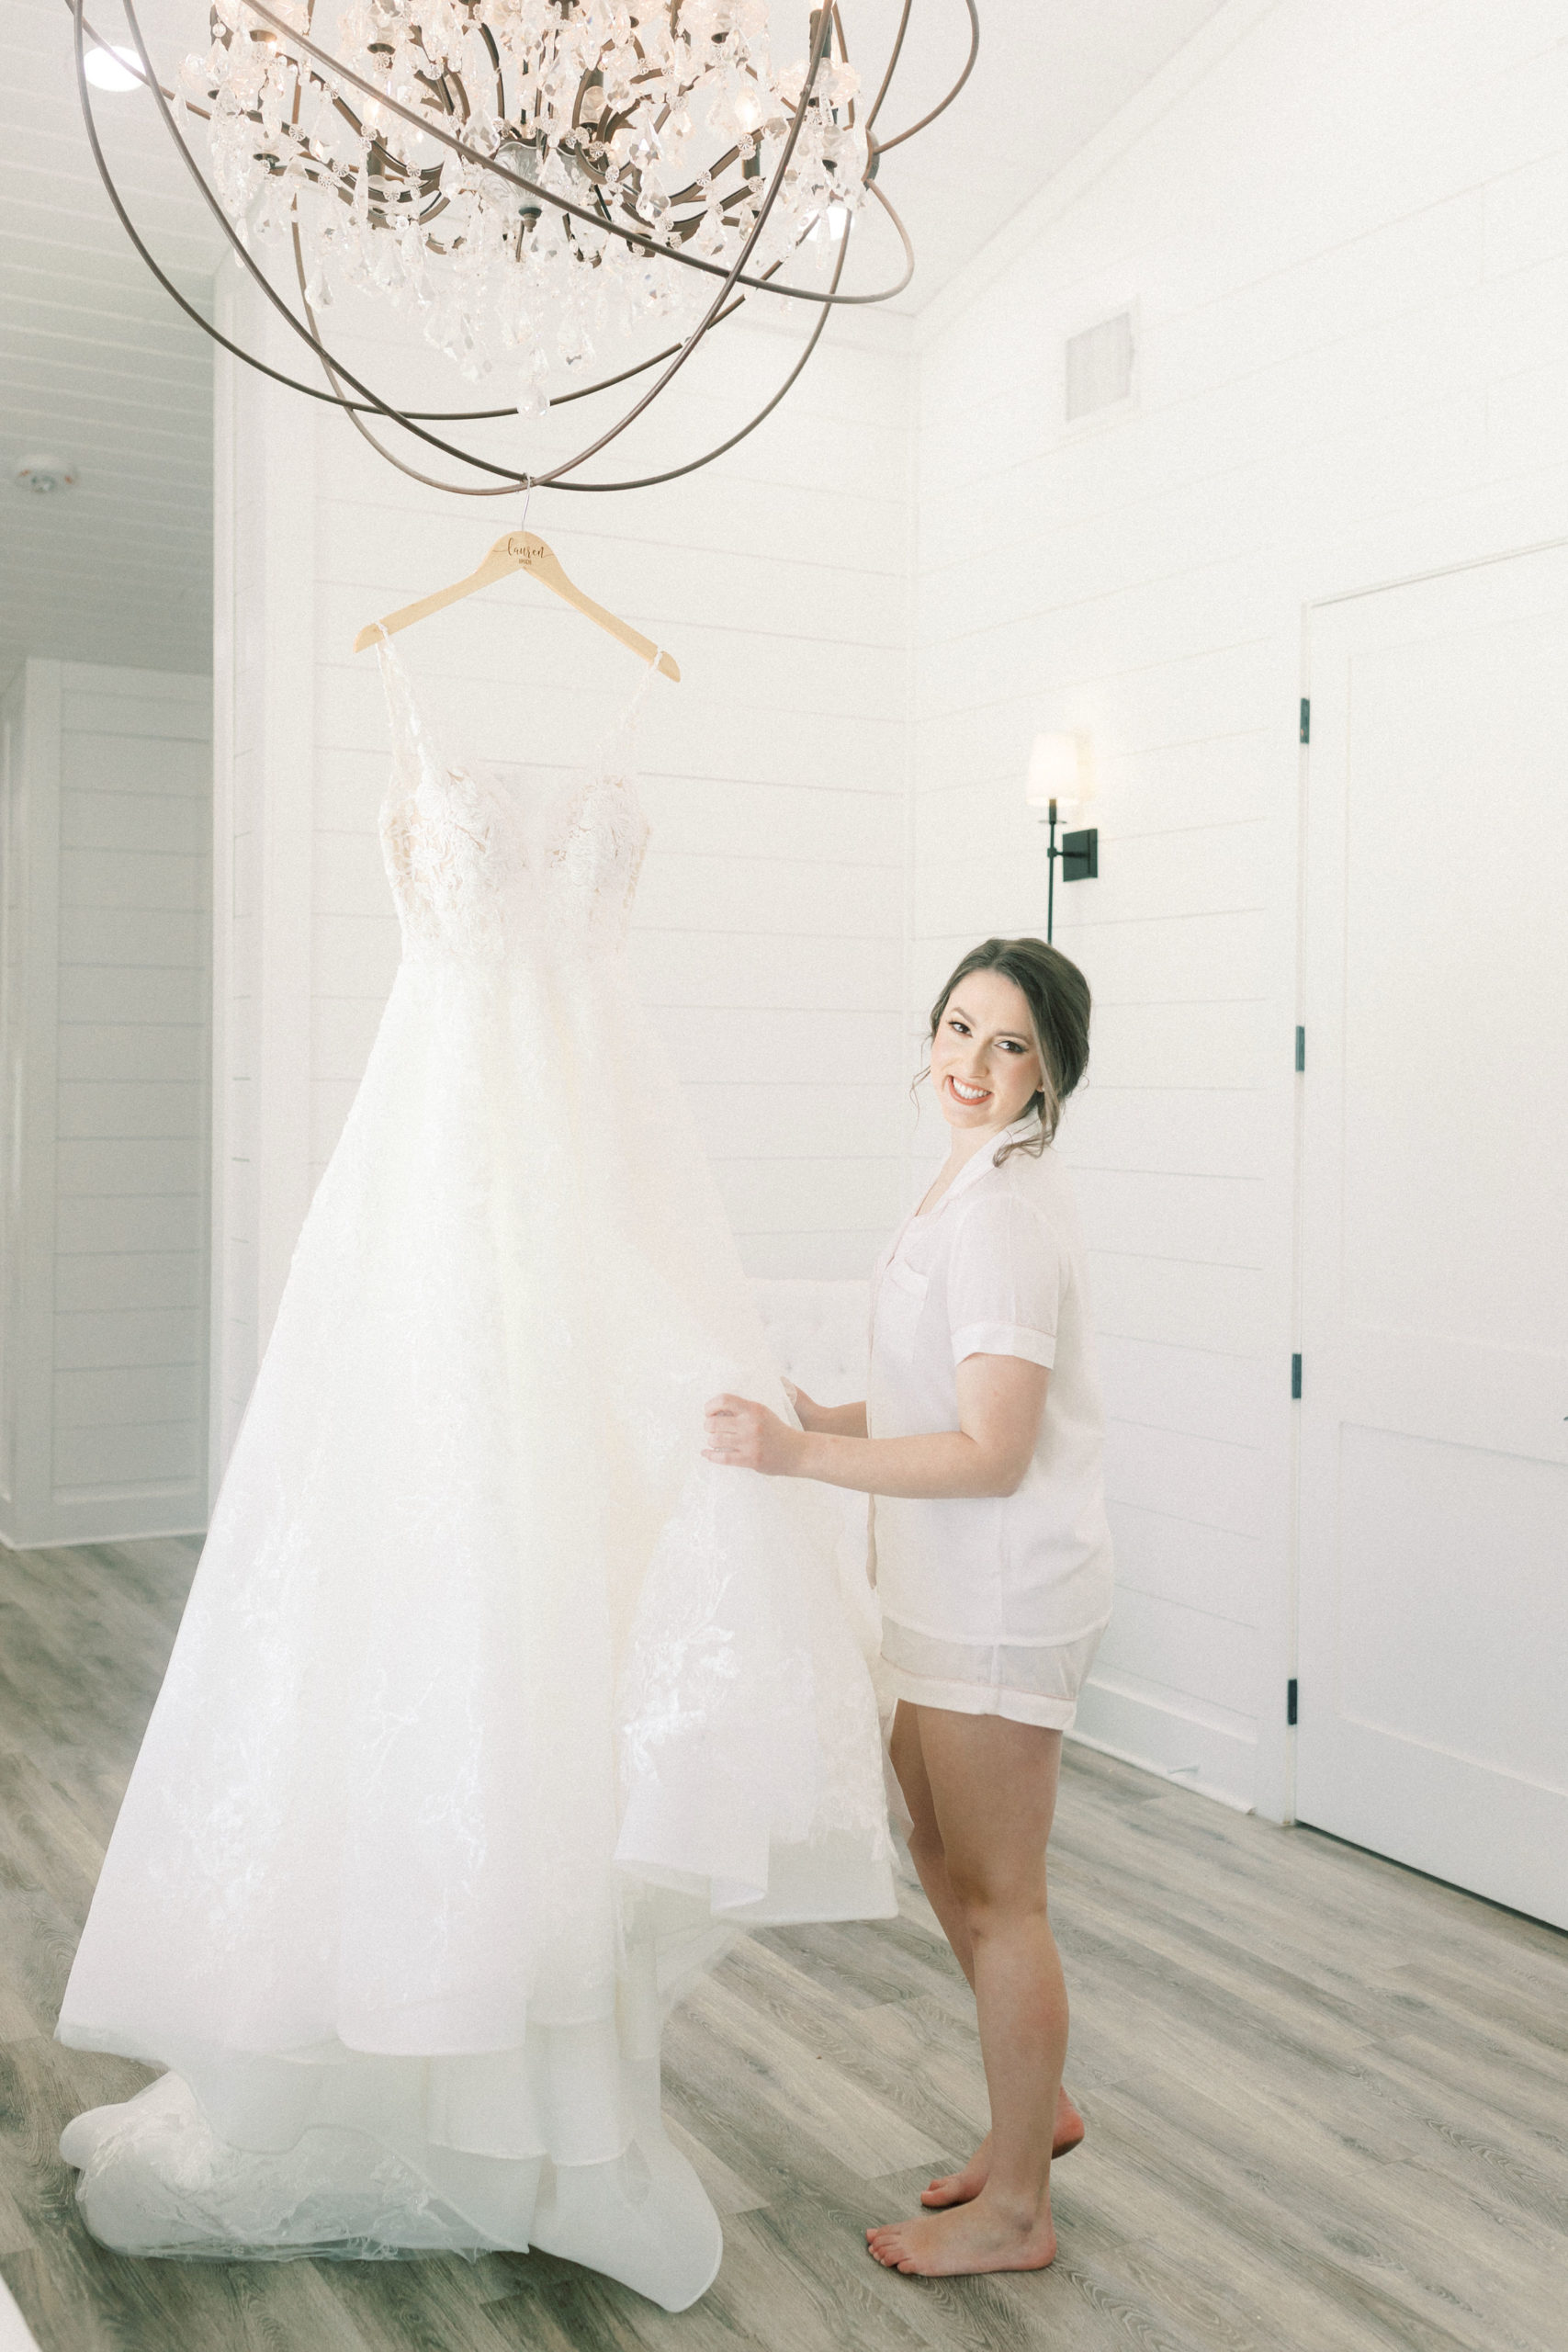 Bride with her dress on hanger